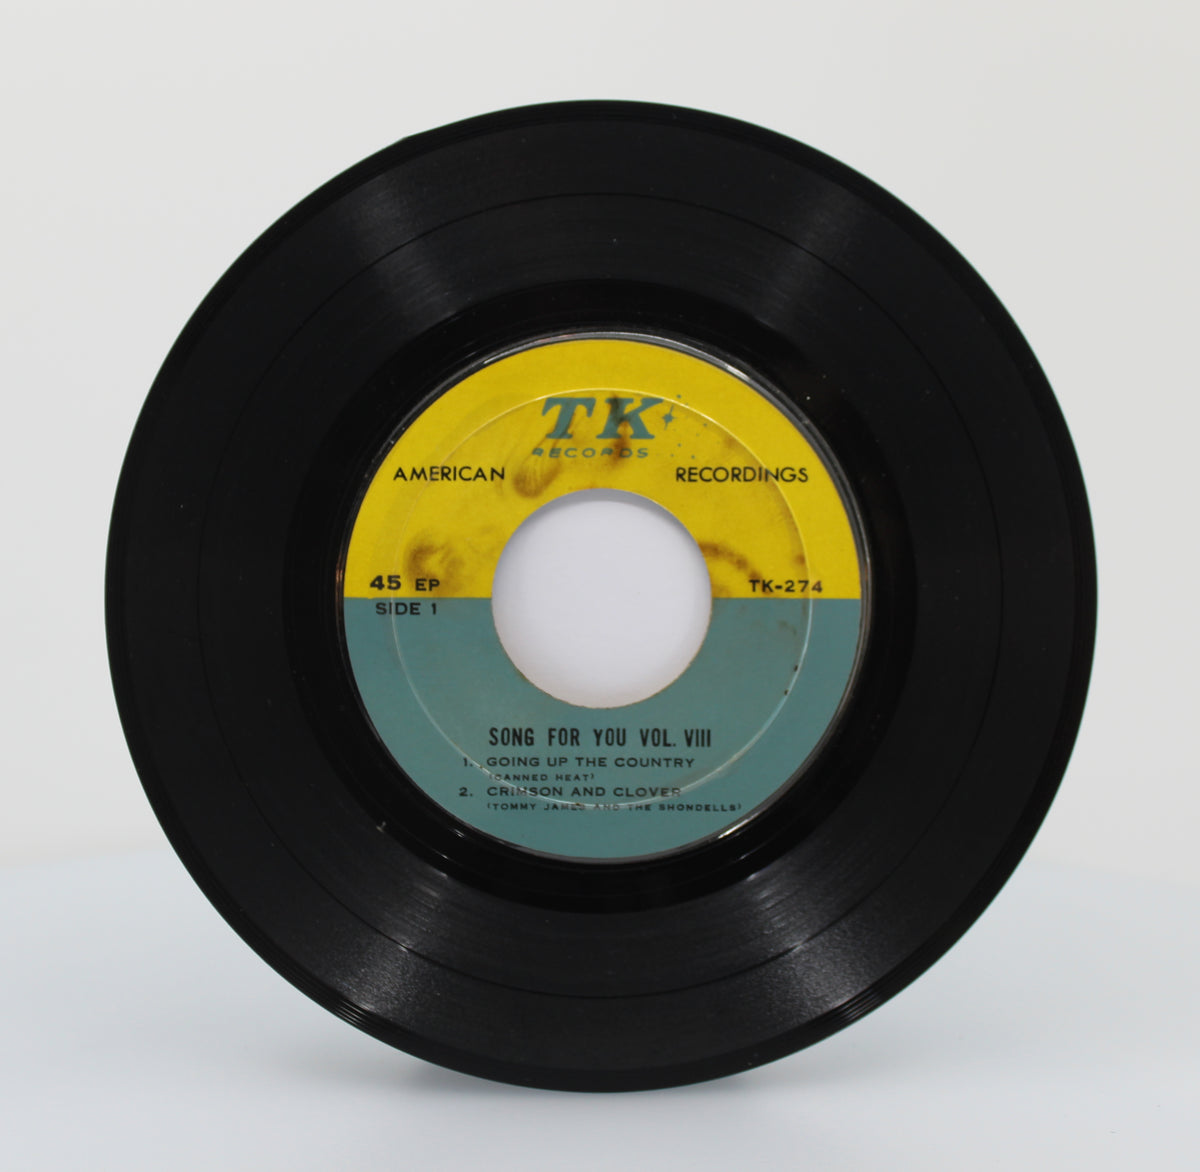 Bee Gees - I Started A Joke, Vinyl, Single (45rpm), Thailand